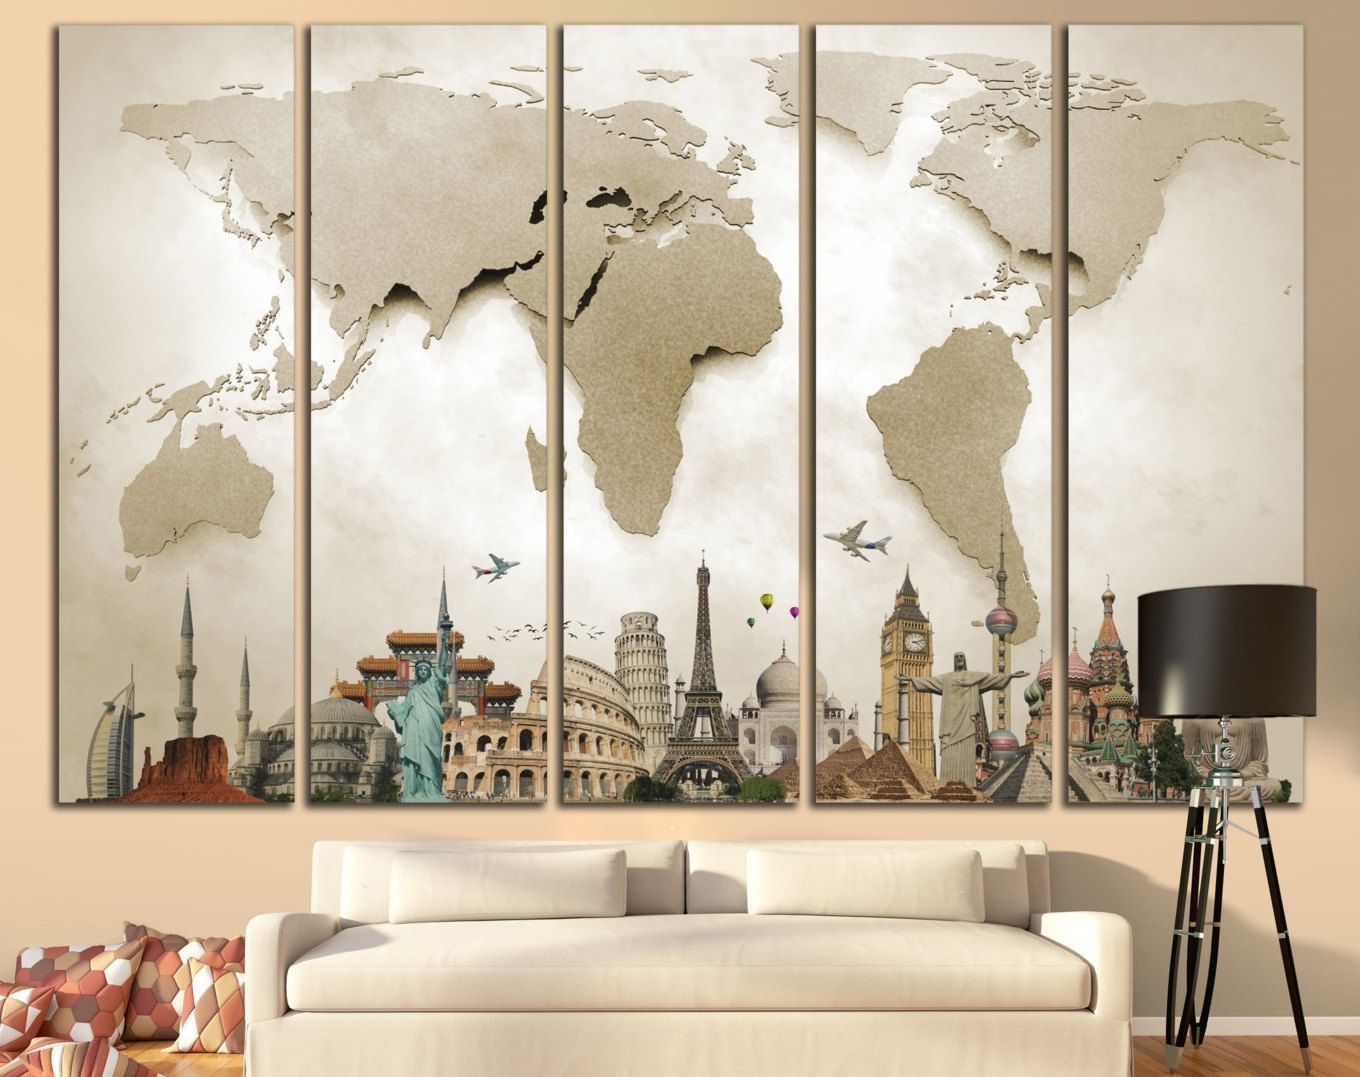 Cheap Big Wall Art In Preferred Wall Art Designs: Large Wall Art World Map Large Print Beige World (View 2 of 15)